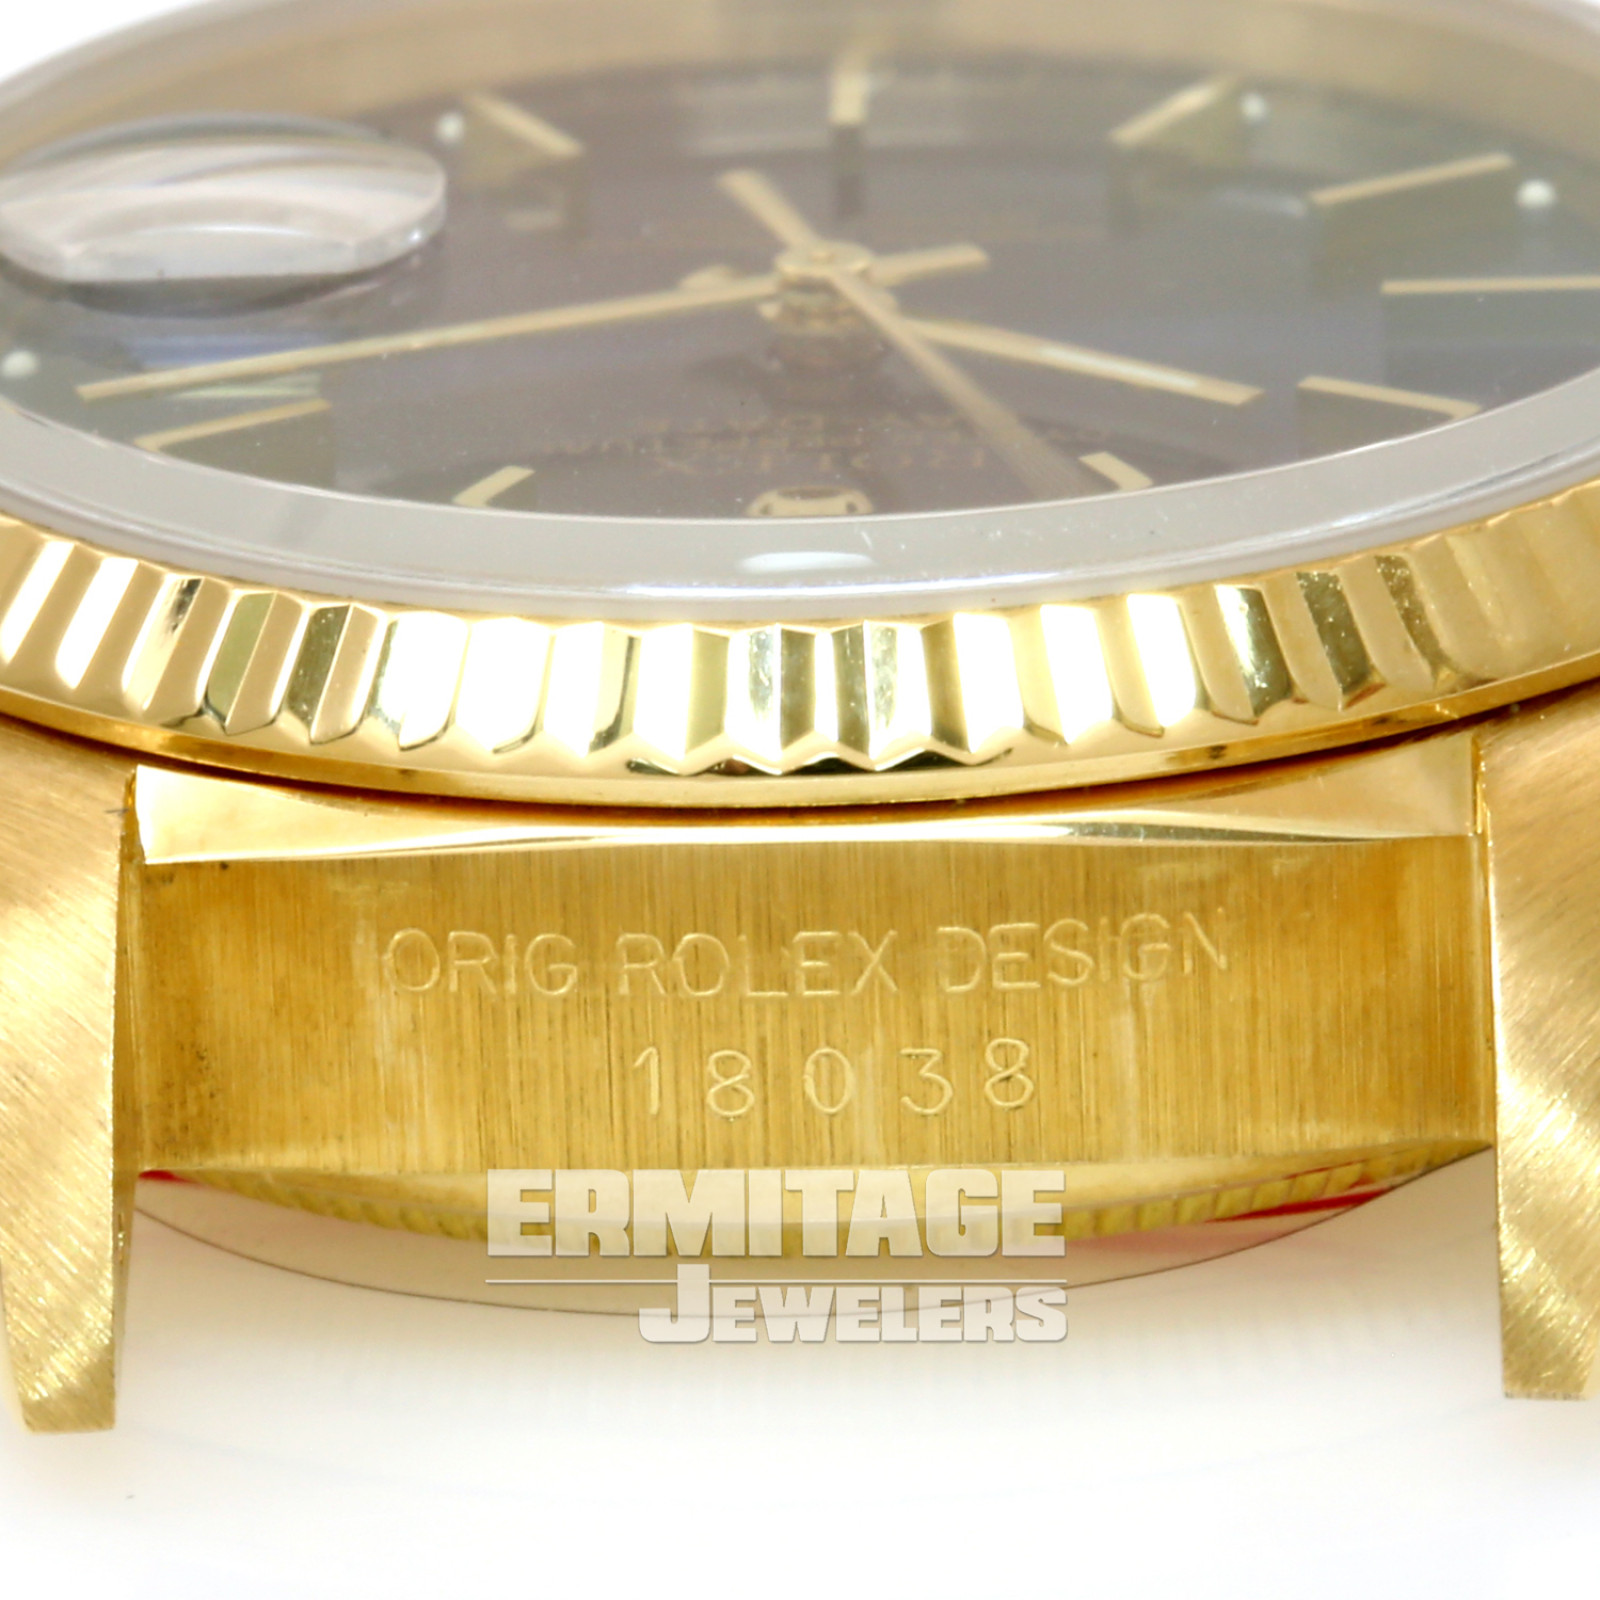 Pre-Owned Rolex Day-Date 18038